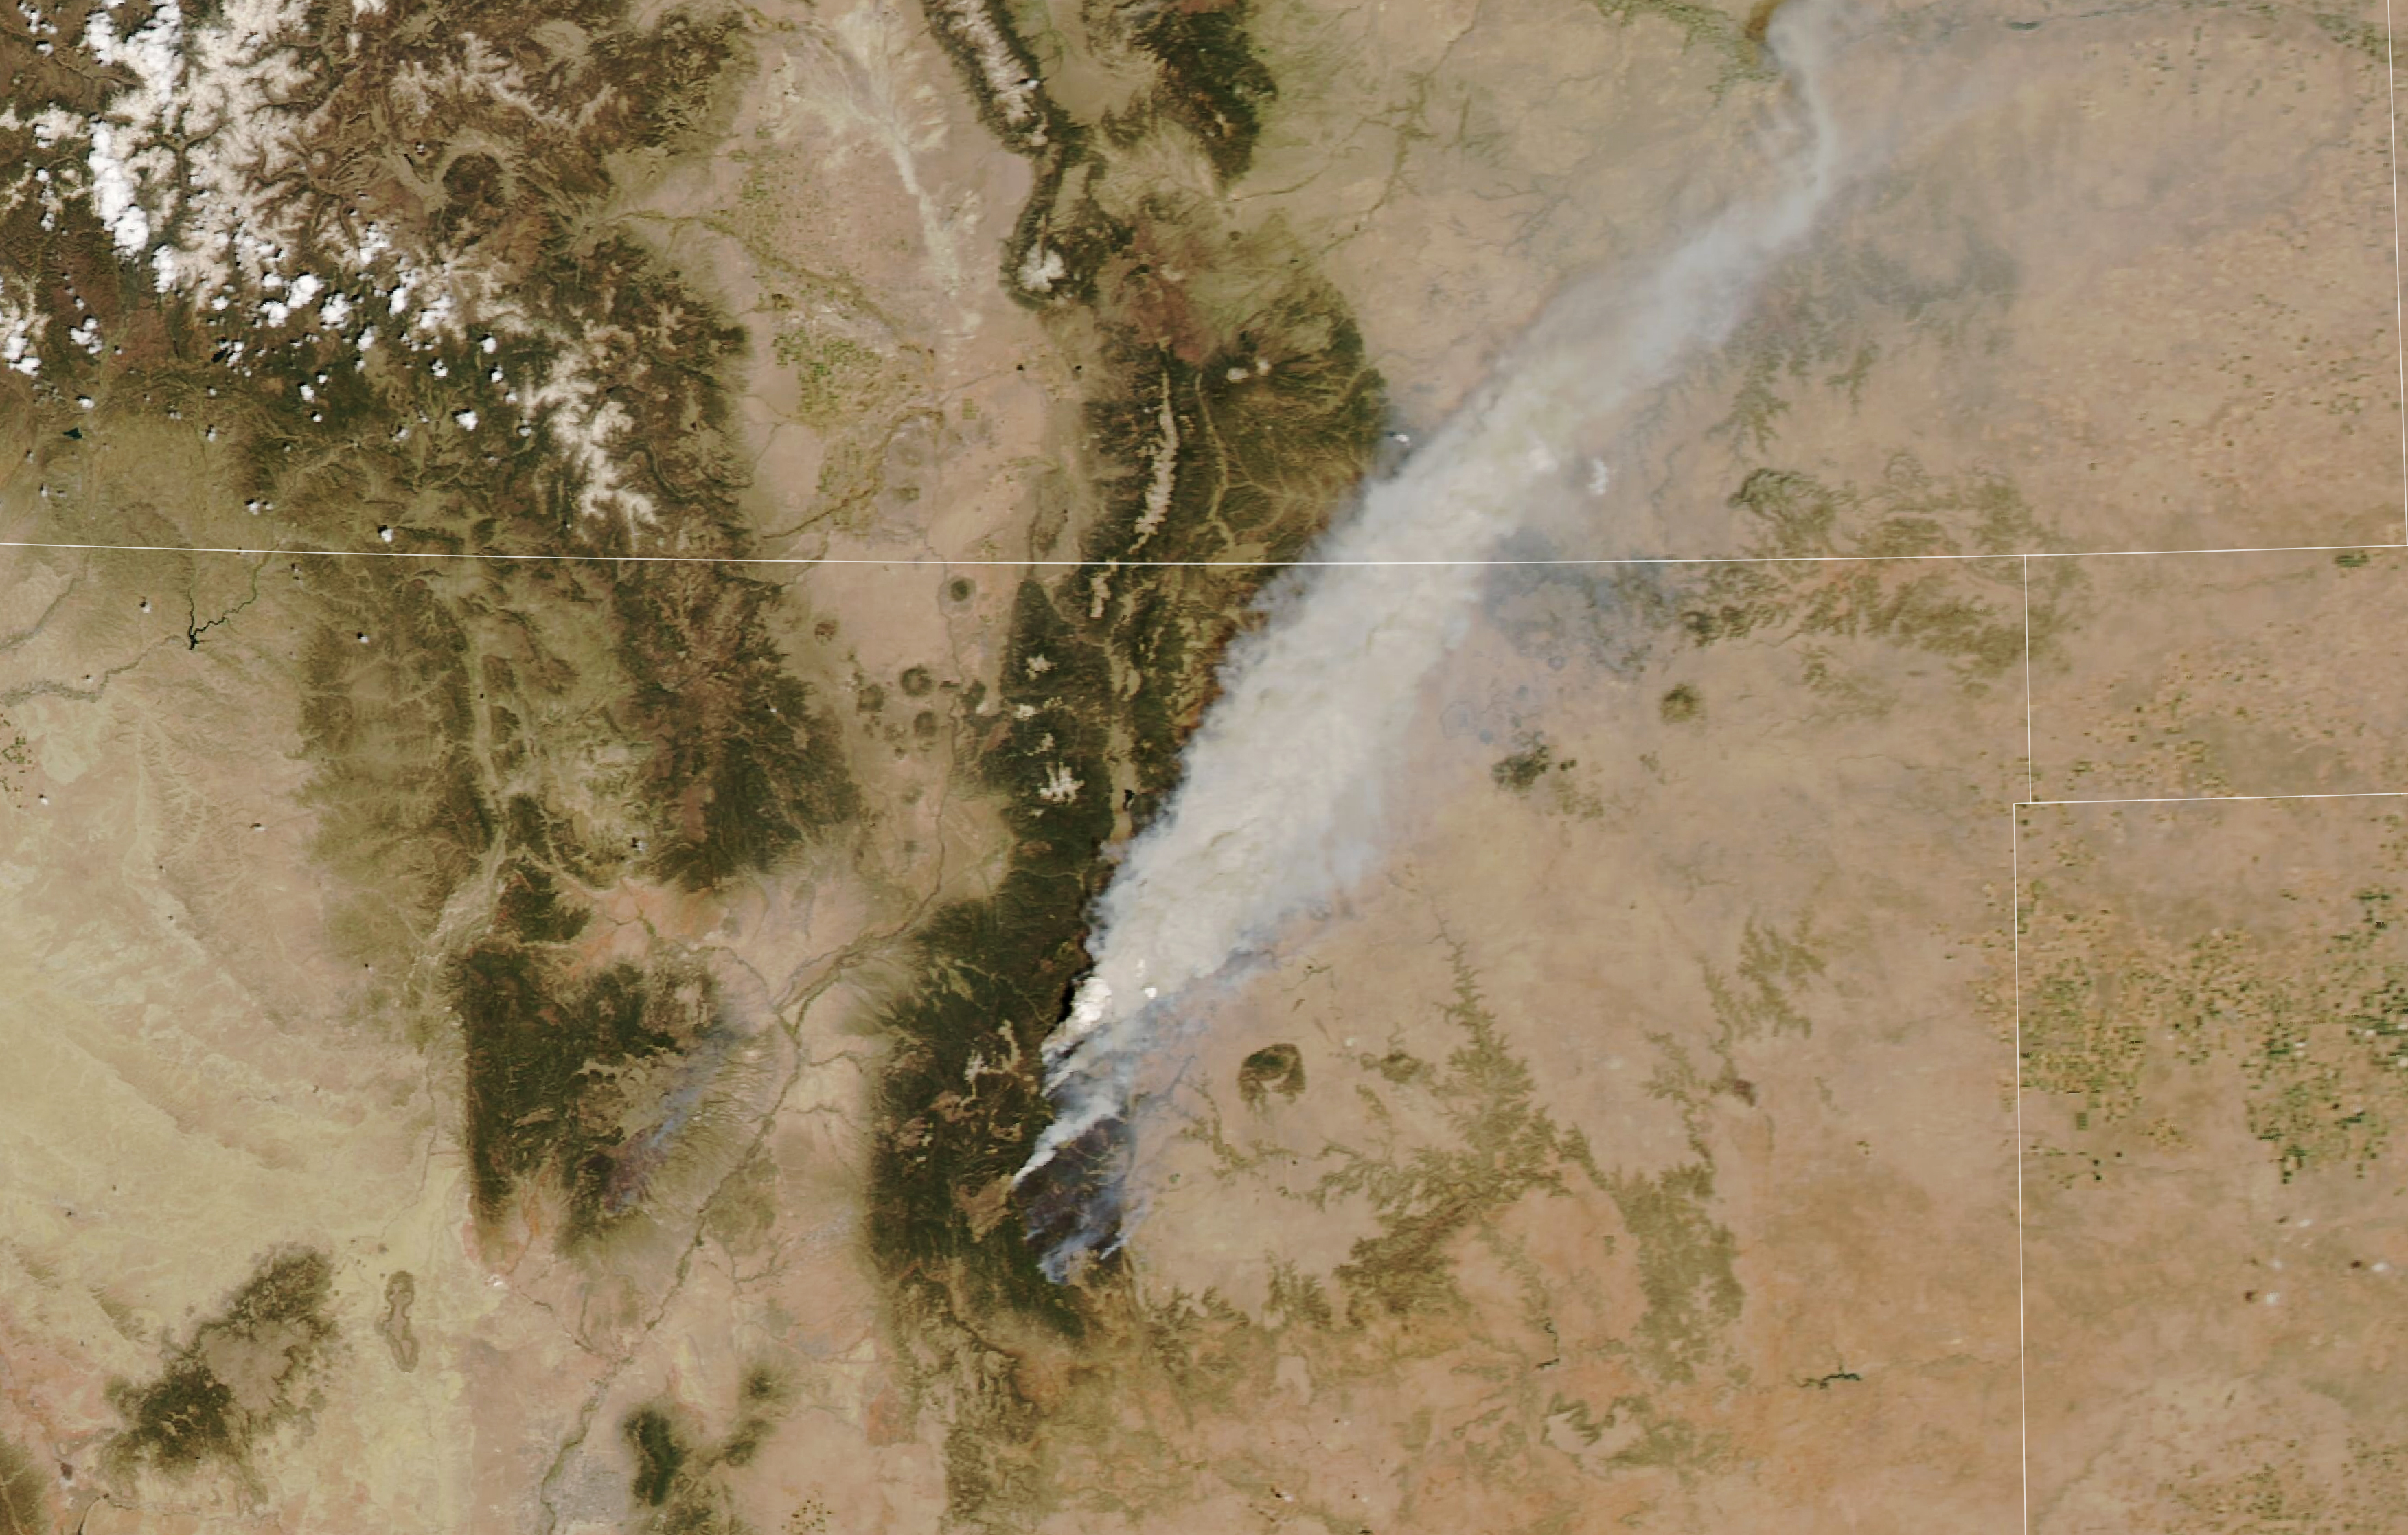 New Mexico Wildfire Spawns Fire Cloud - related image preview